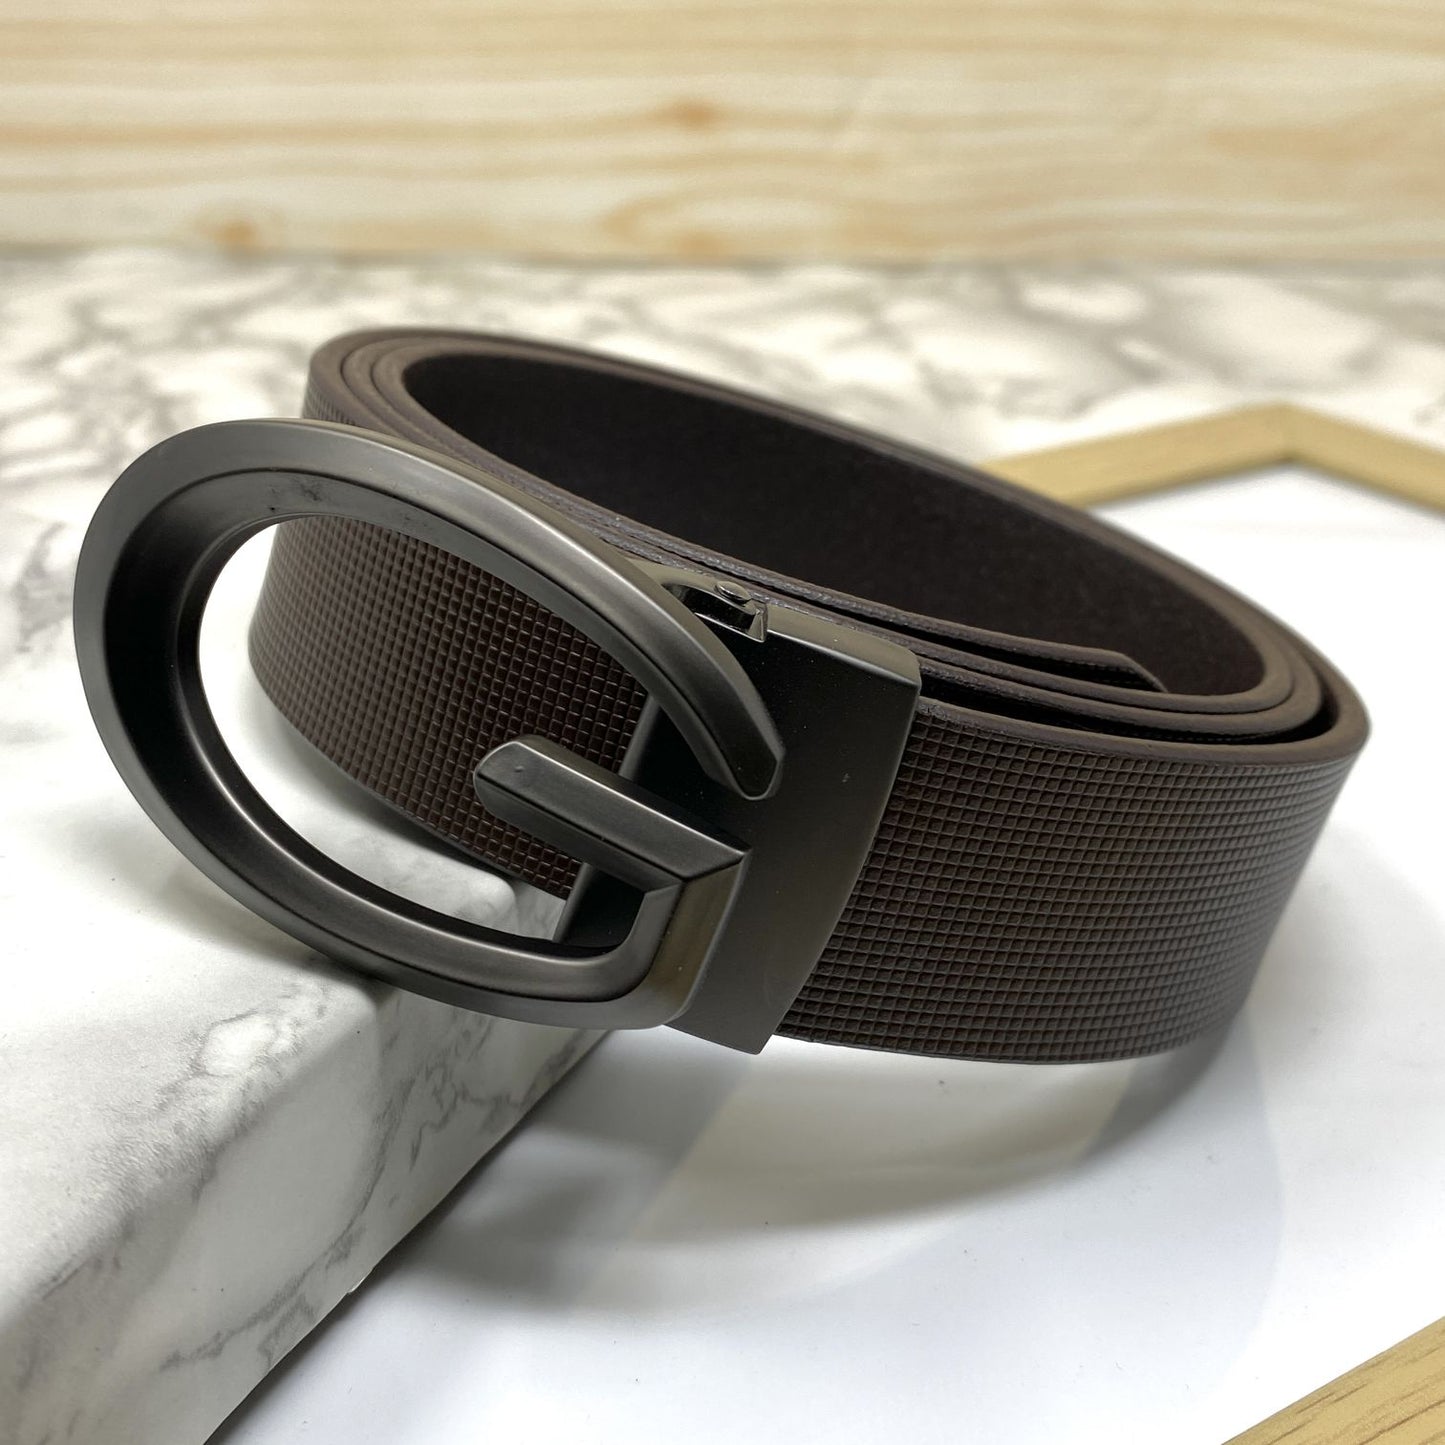 Classic G-Pattern Formal and Casual Leather Strap Belt -JonasParamount